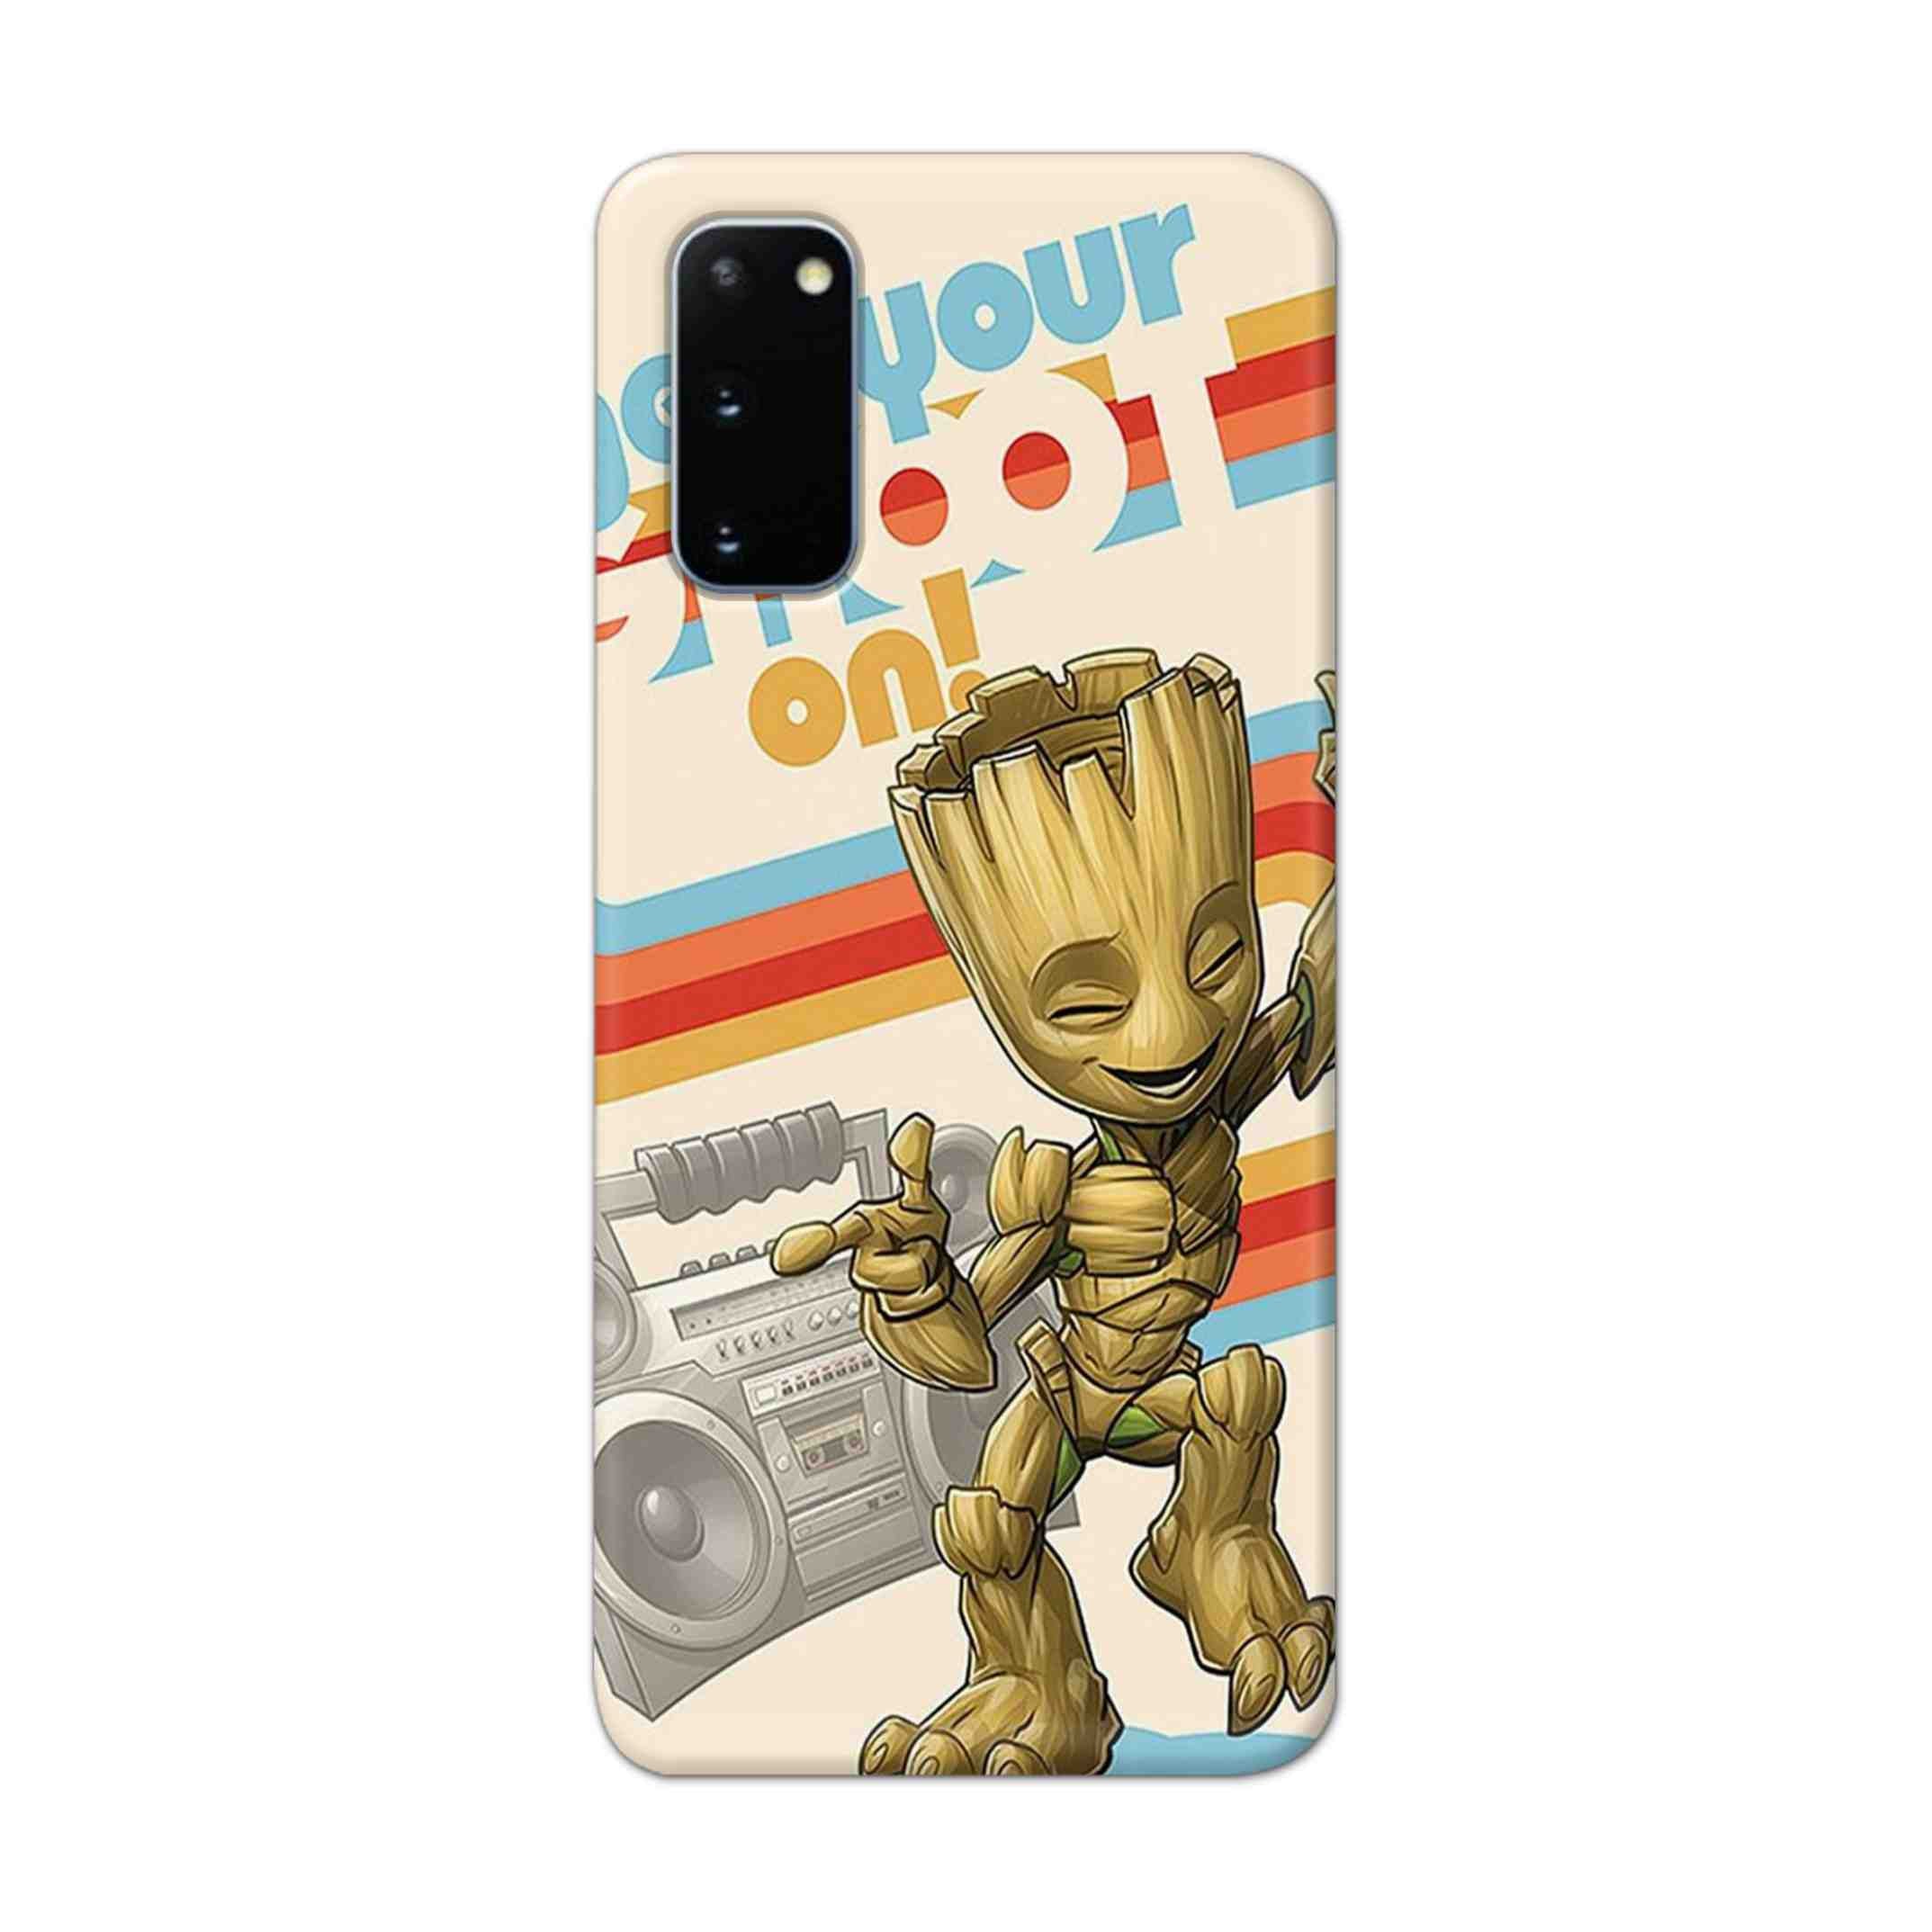 Buy Groot Hard Back Mobile Phone Case Cover For Samsung Galaxy S20 Online